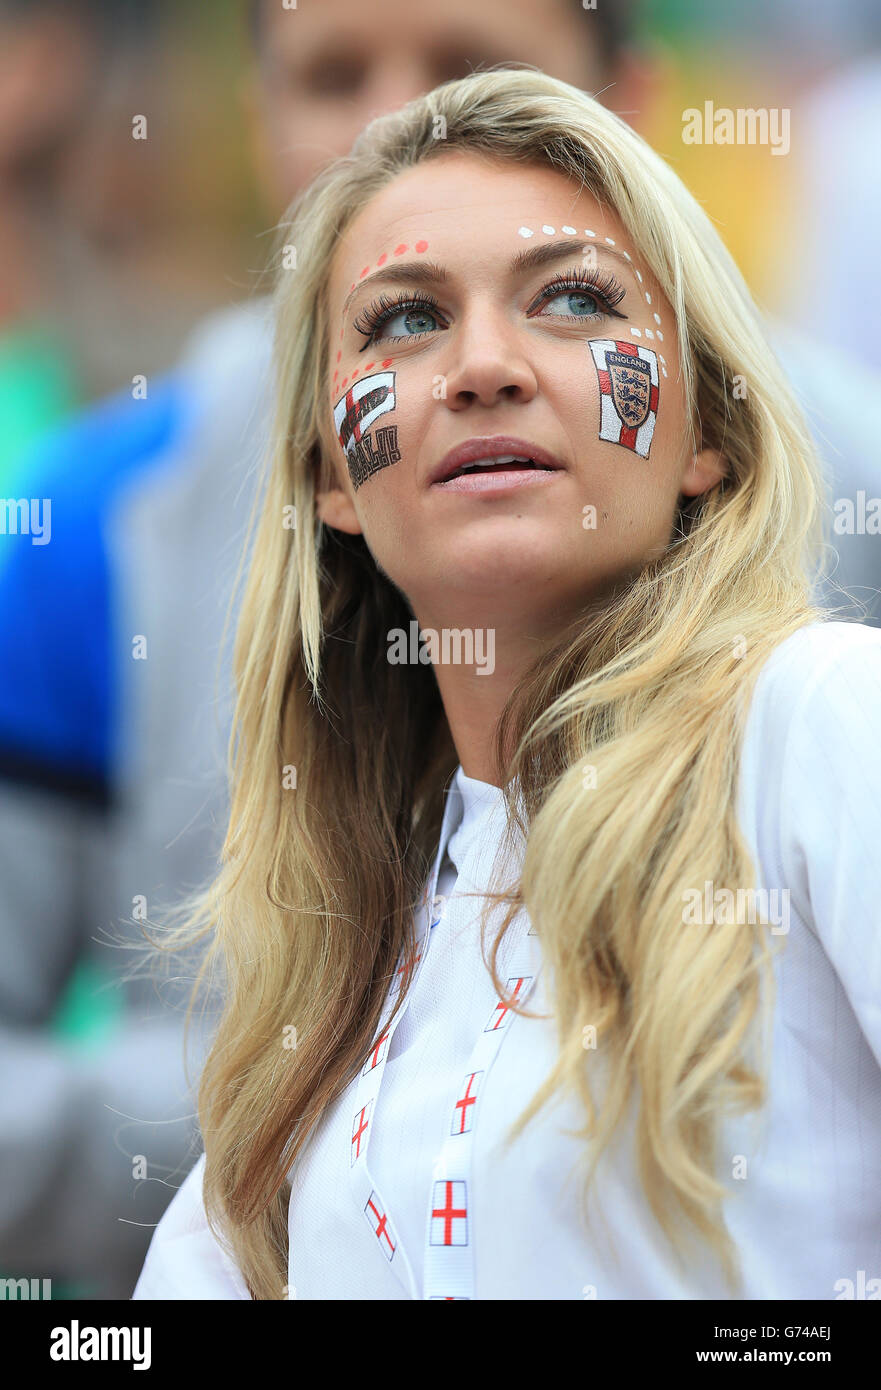 An England fan wearing face paint before the game during the Group D match the Estadio do Sao Paulo, Sao Paulo, Brazil. Stock Photo